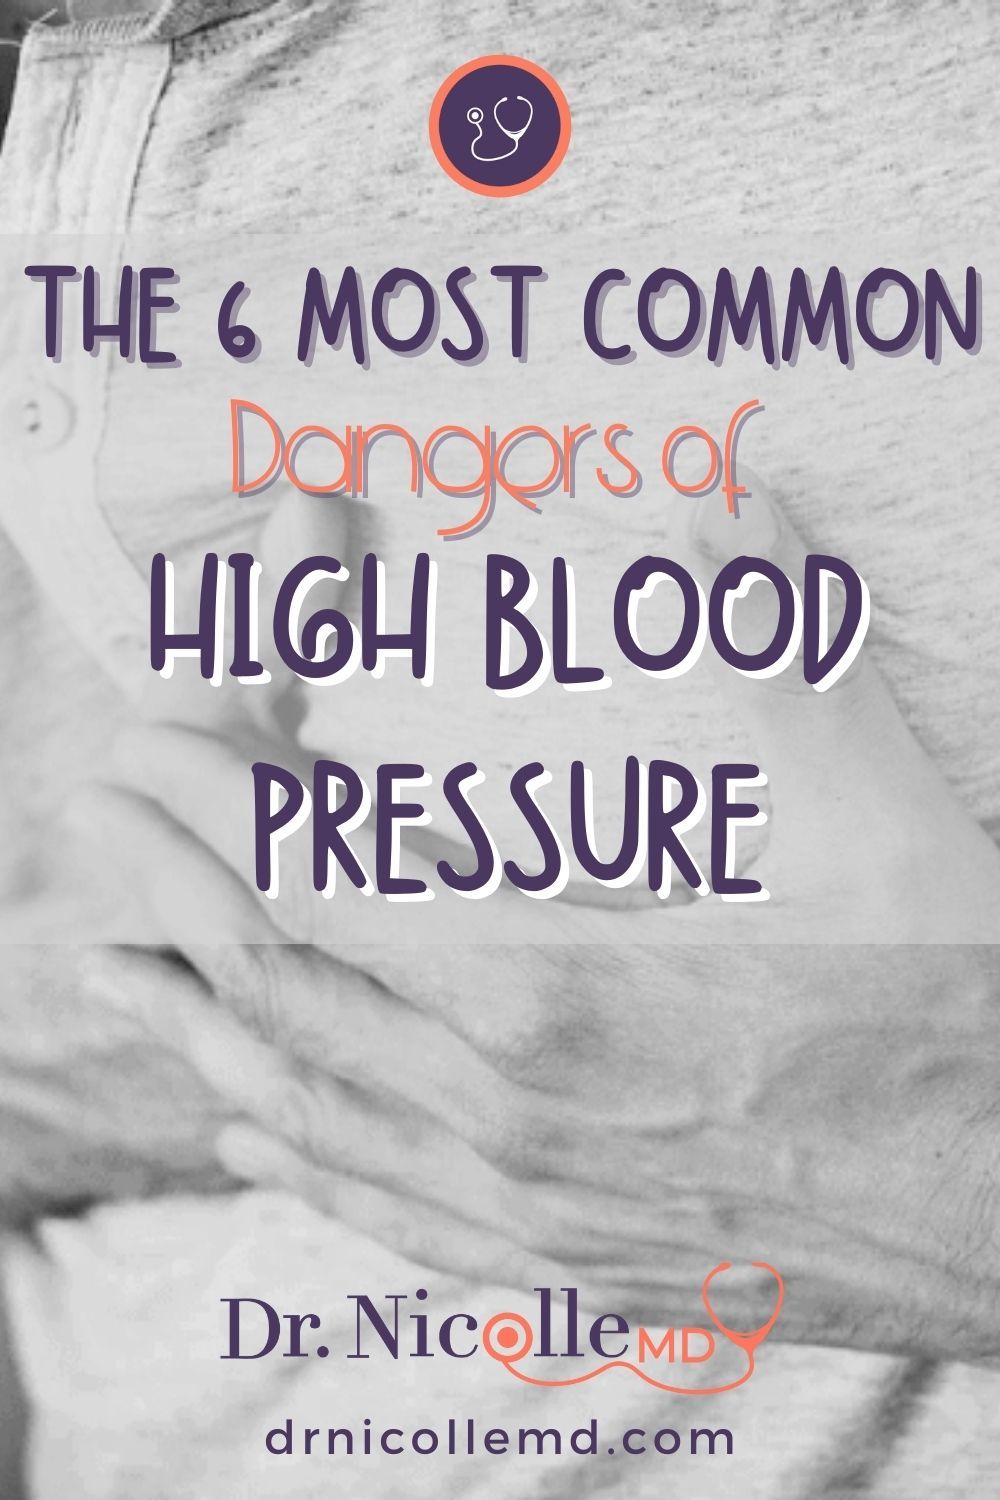 The 6 Most Common Dangers of High Blood Pressure